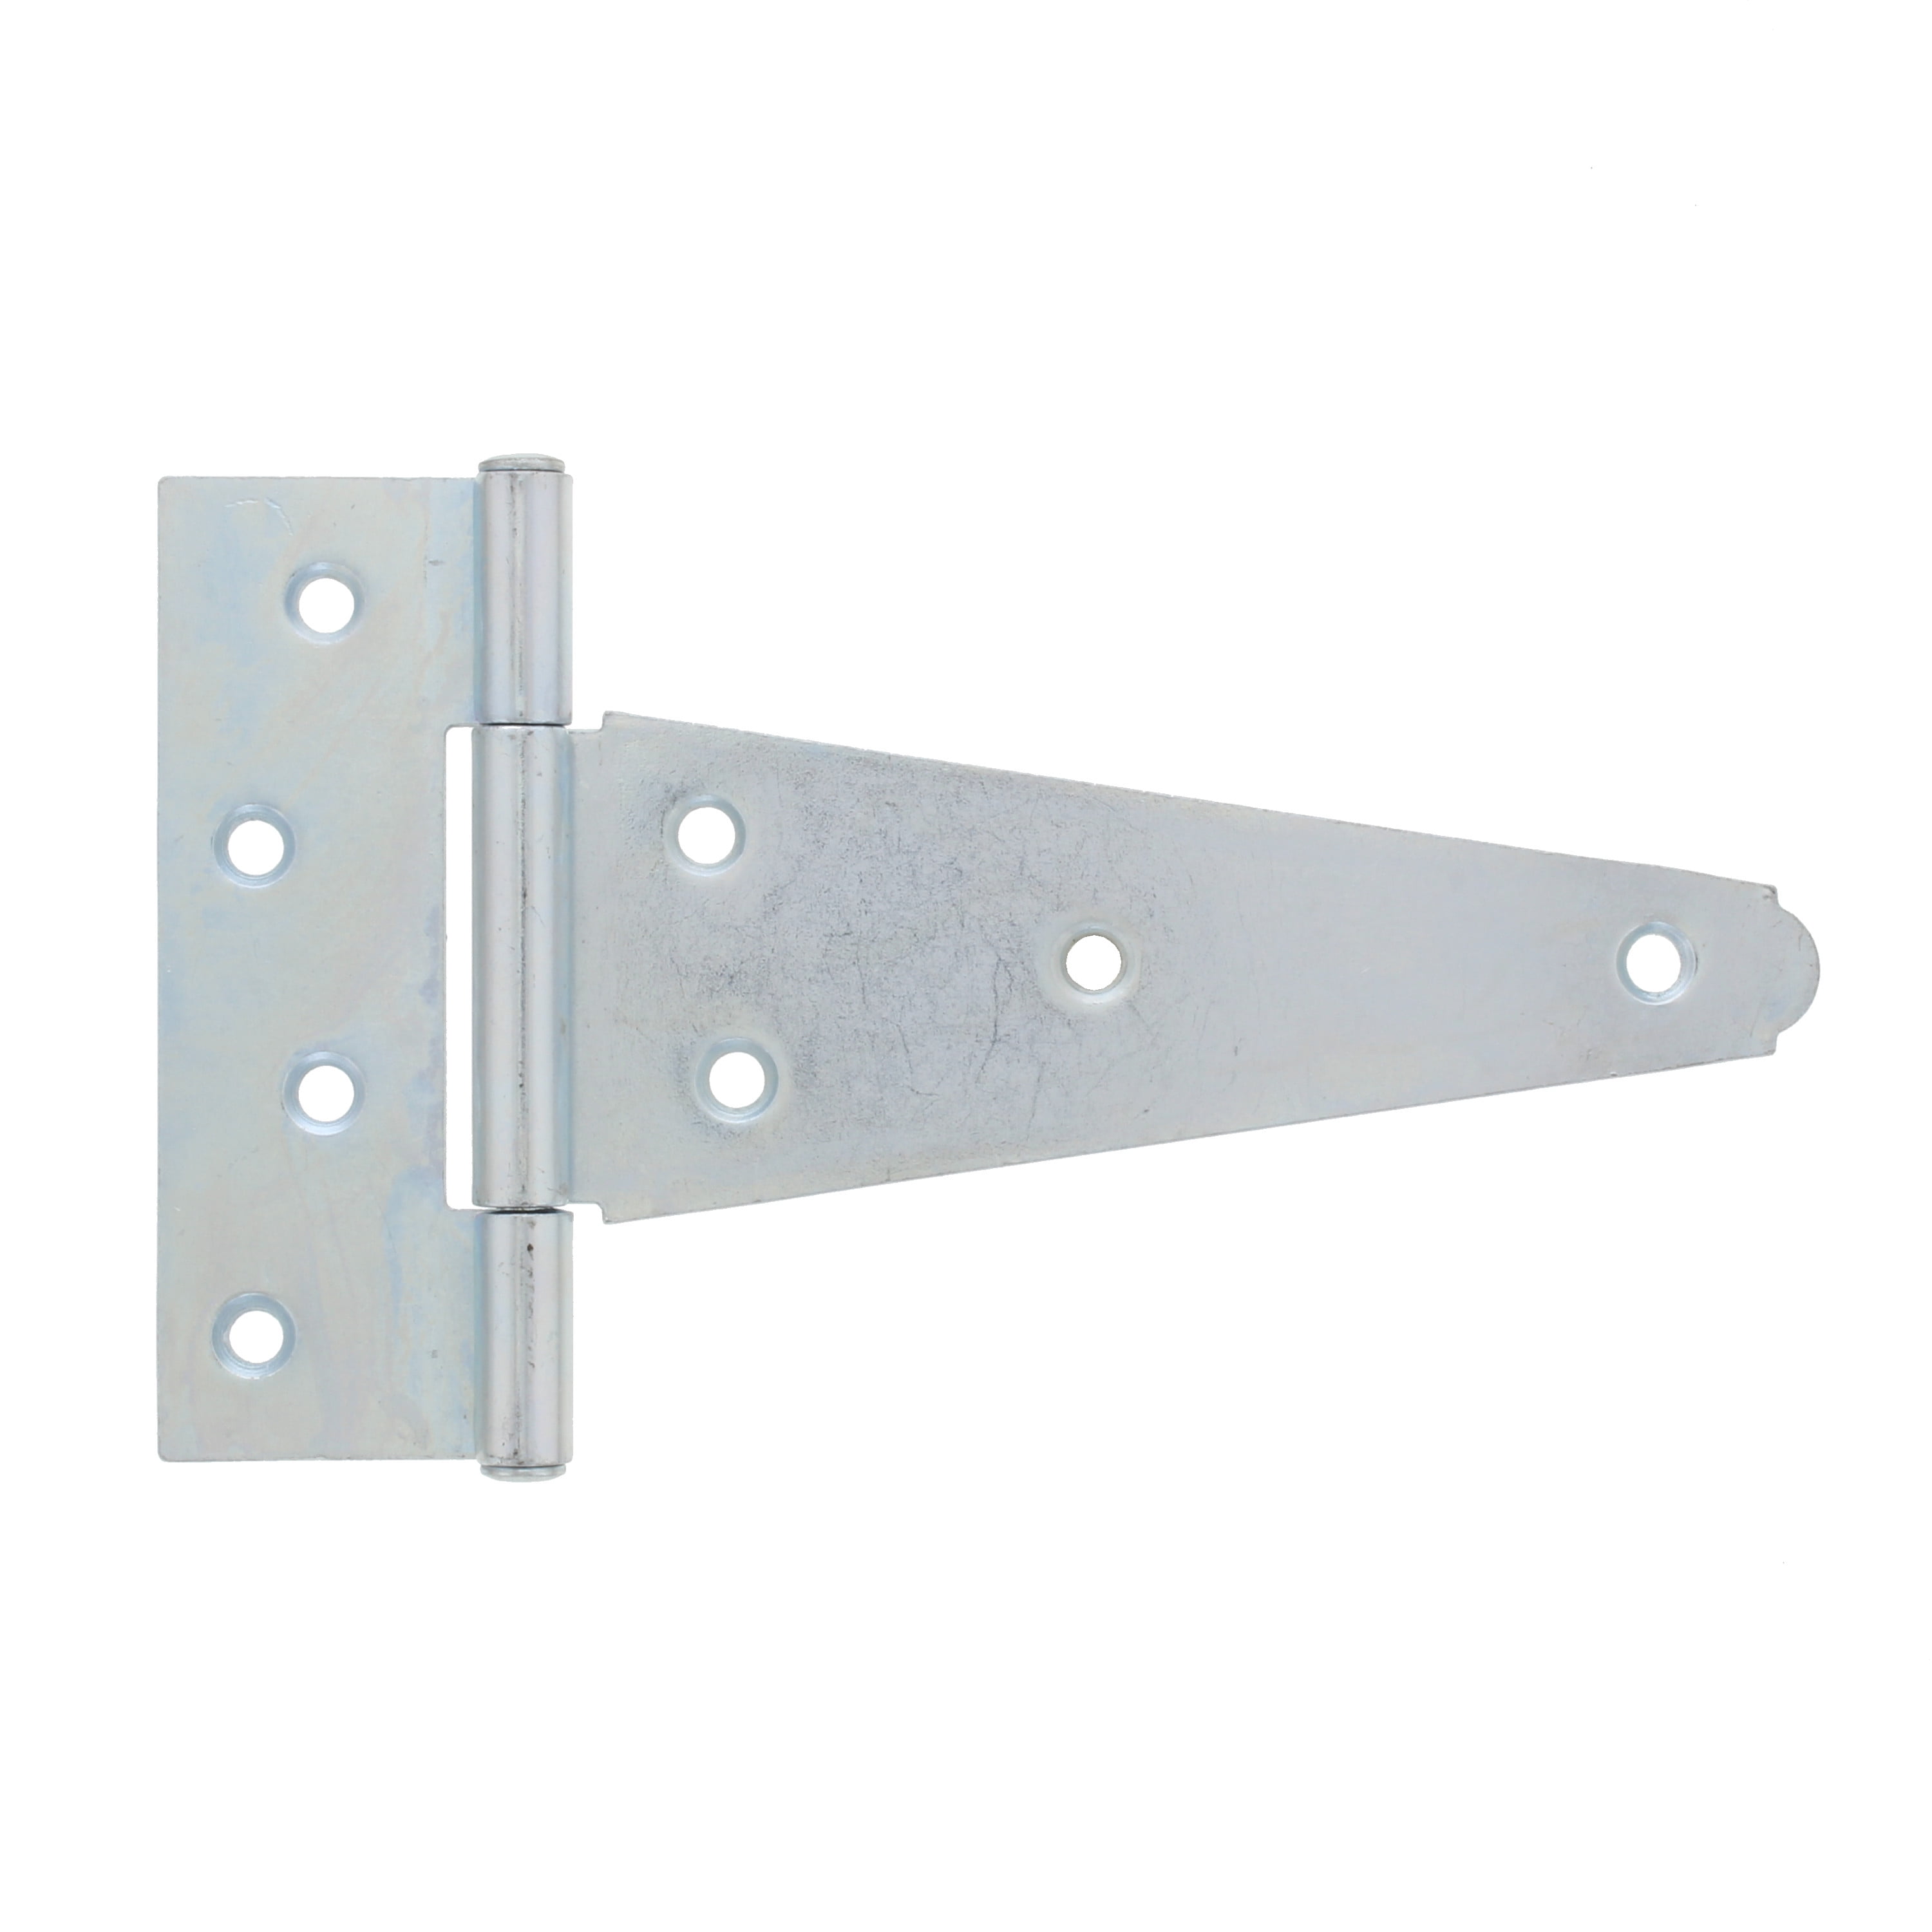 Stainless Steel Cold Room Door Hinges Heavy Duty offset Left/Right 